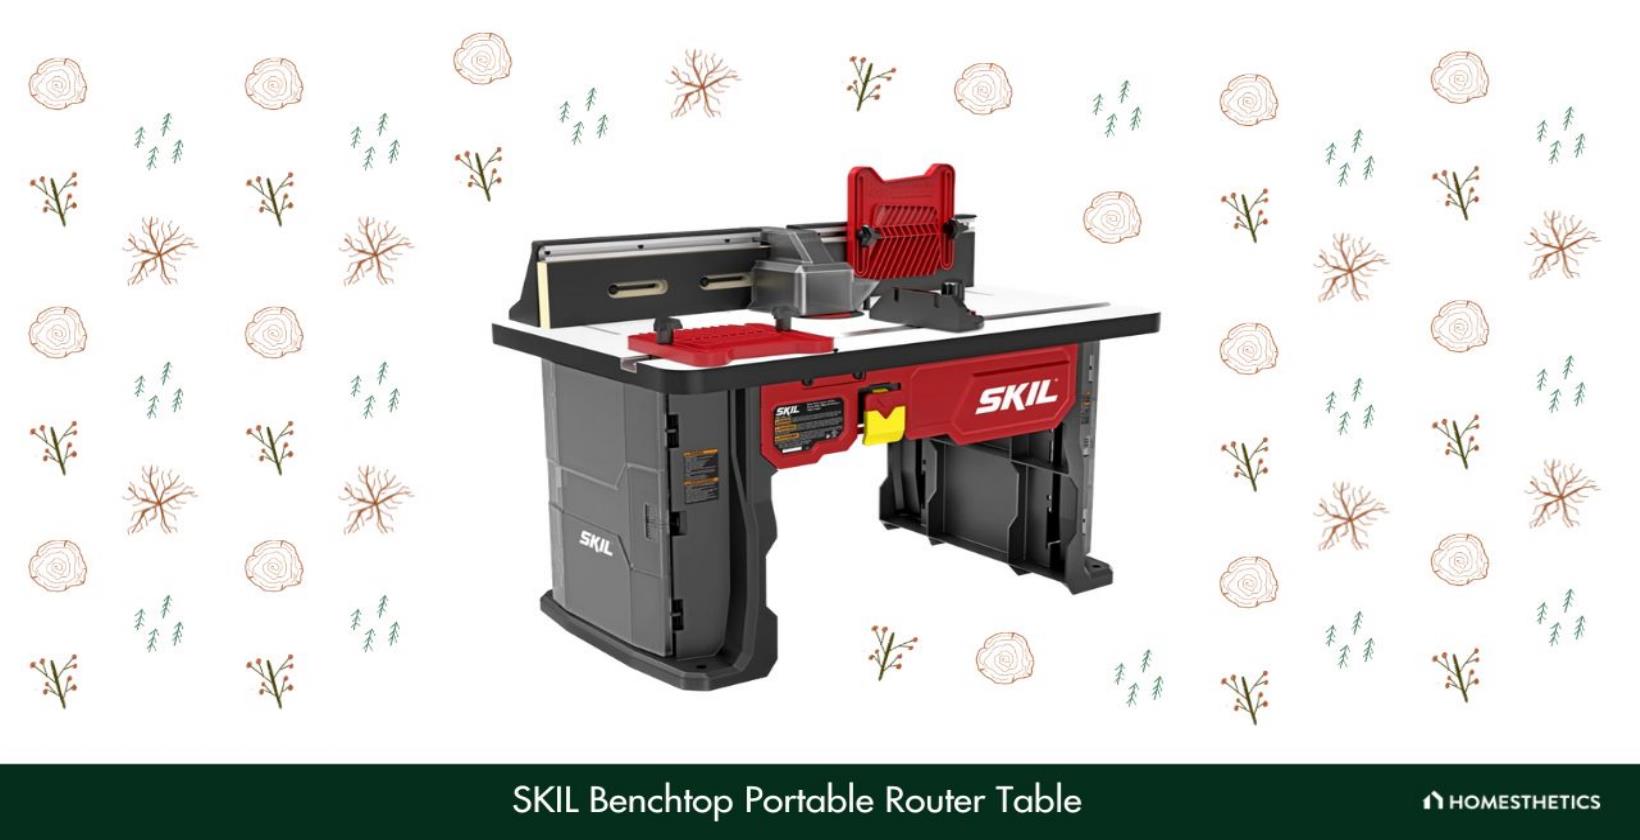 6. SKIL Benchtop Portable Router Table